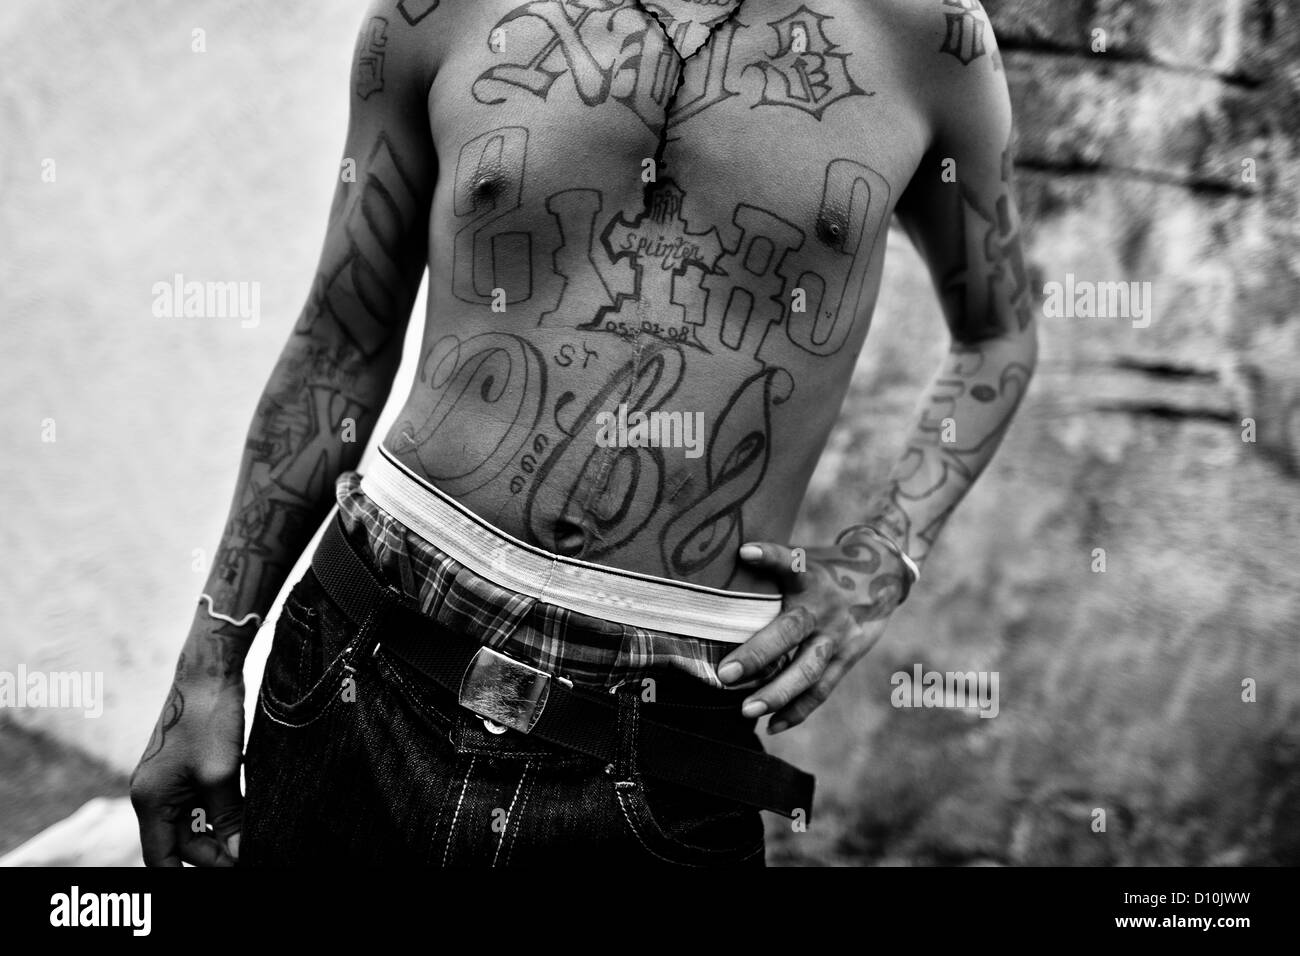 A member of the 18th Street Gang (M-18) proudly shows off his gang tattoos in San Salvador, El Salvador. Stock Photo